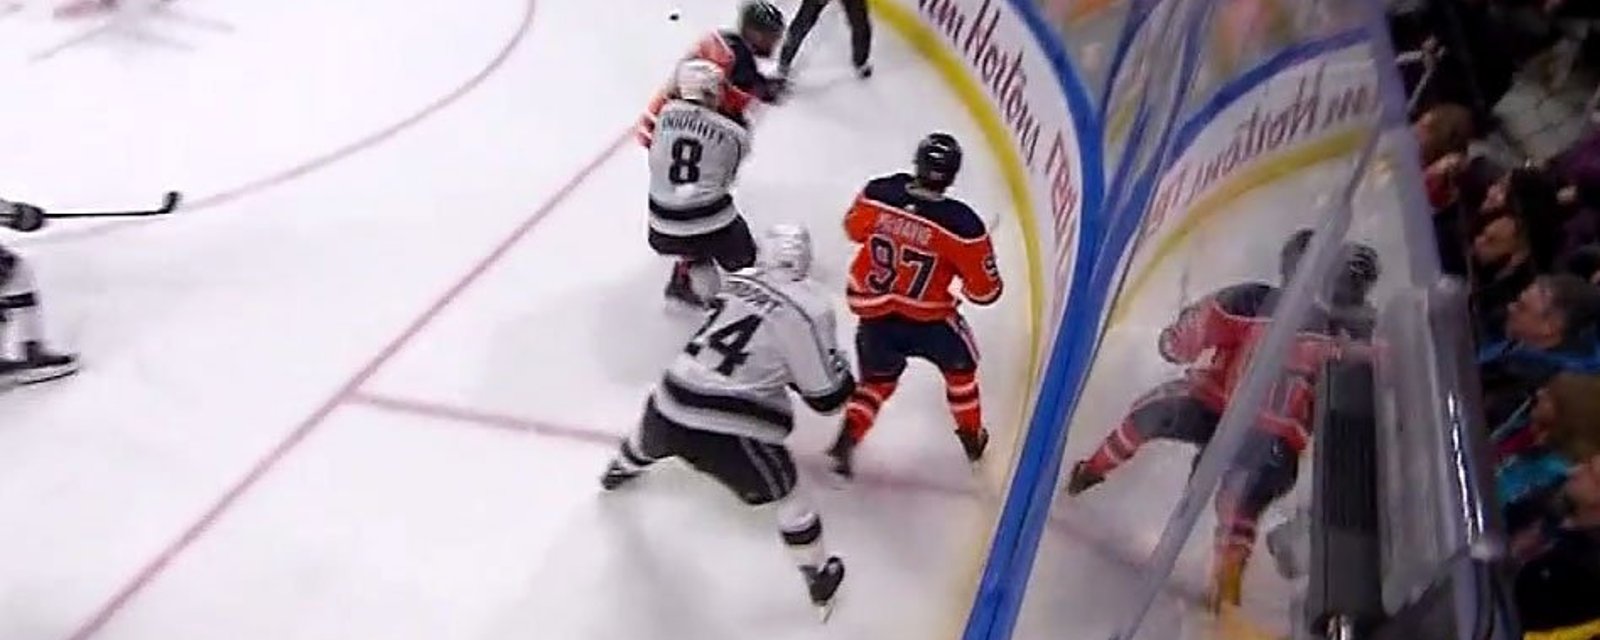 Must see: Maroon takes a cheap shot at Doughty and targets his head!